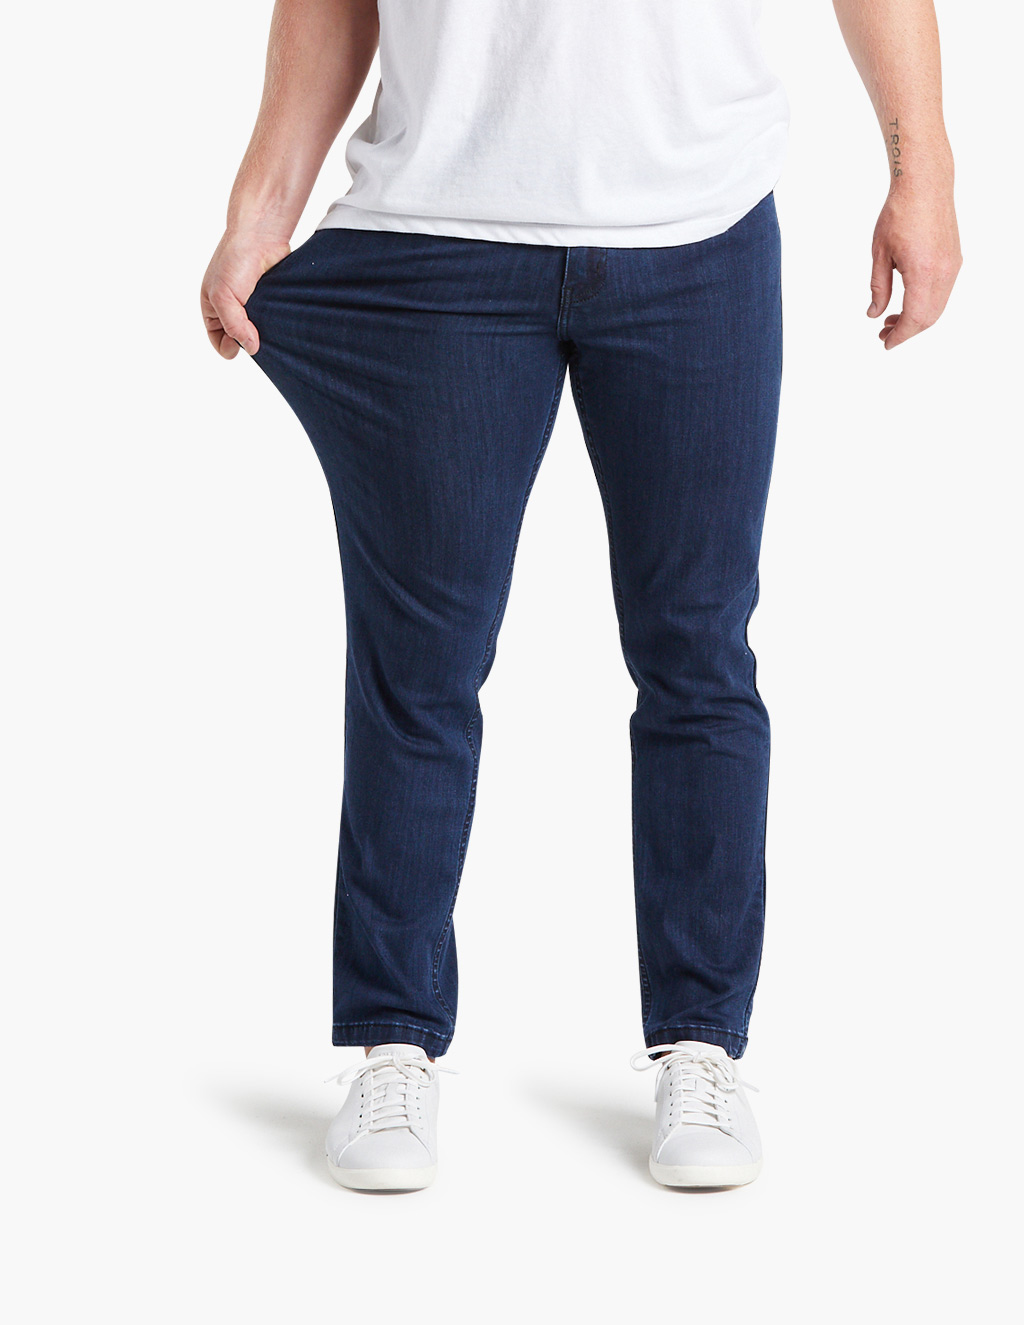 Athletic Fit Jeans by Mugsy Jeans